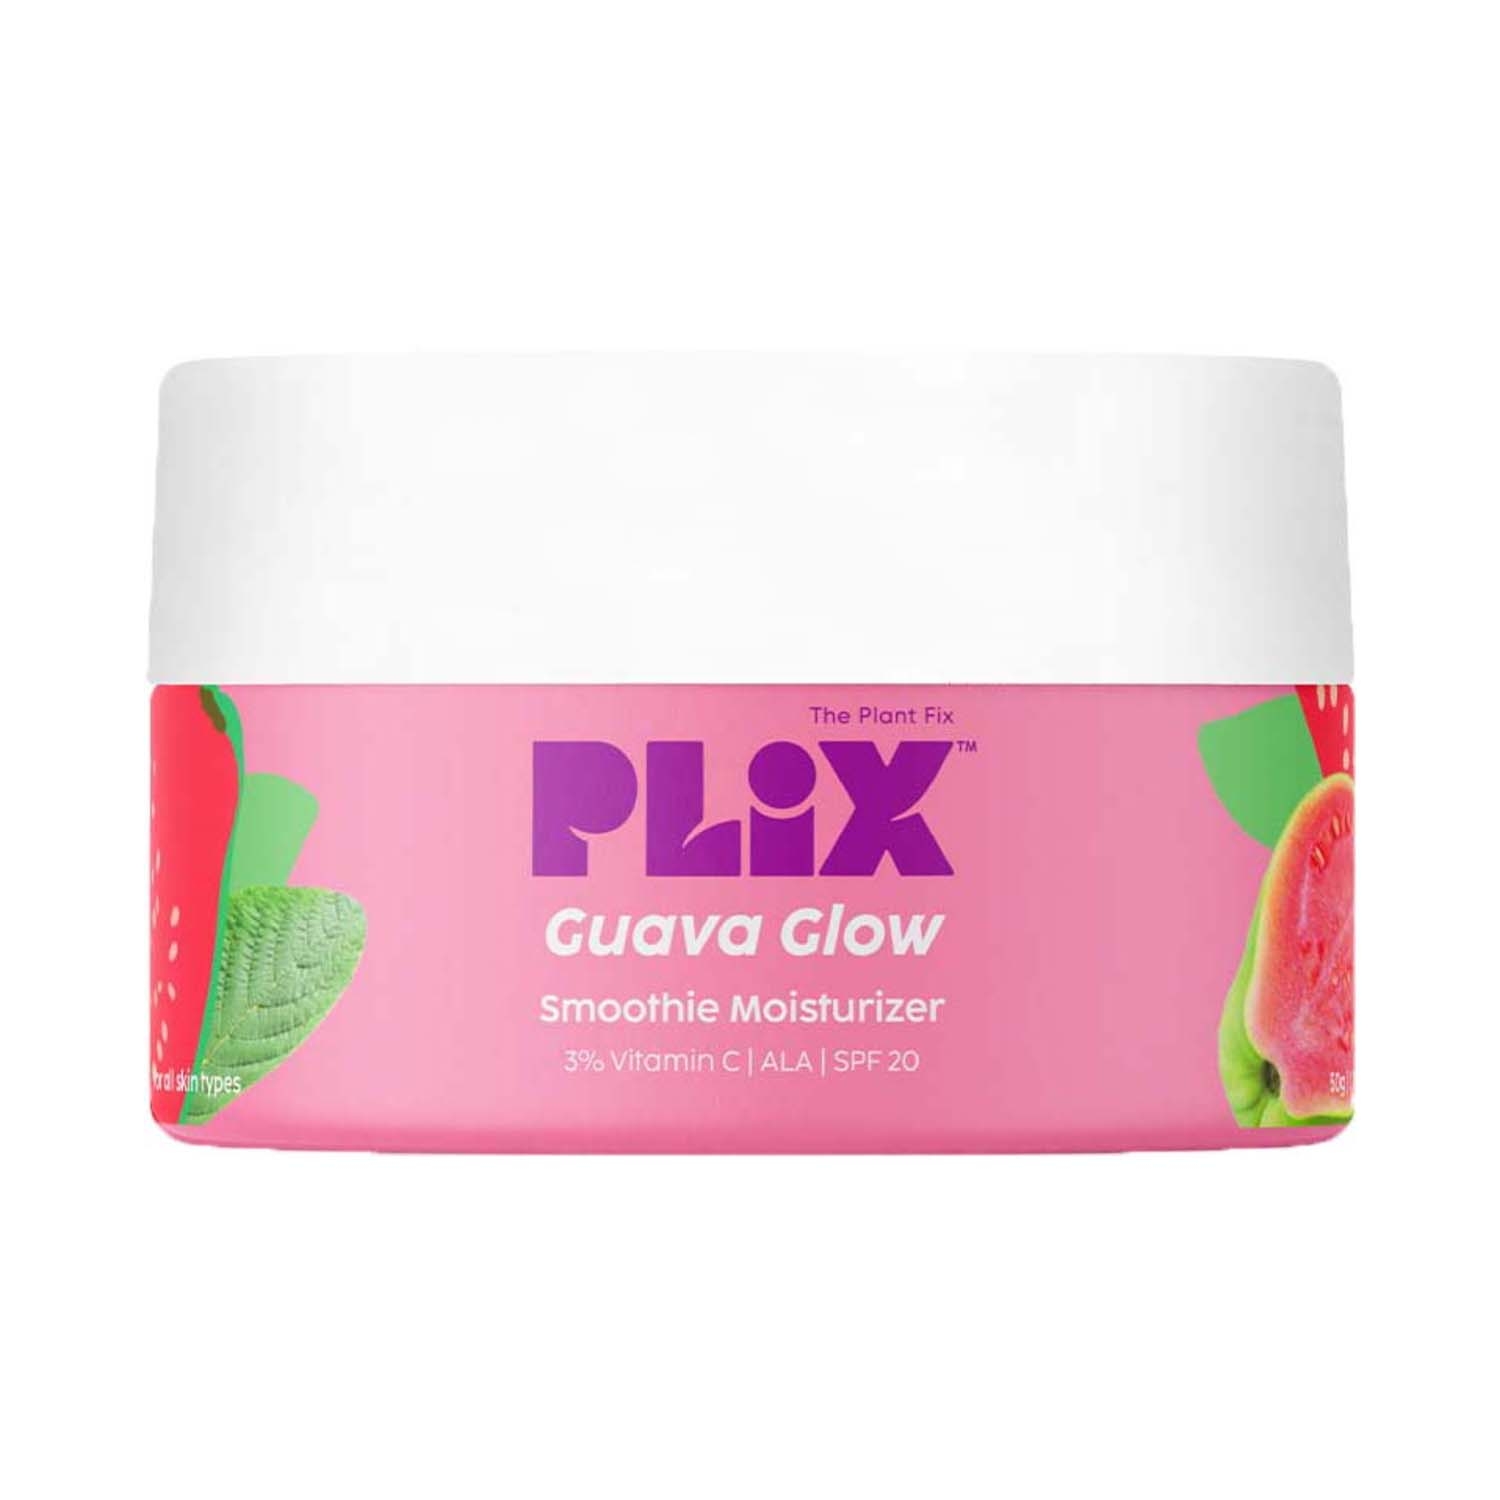 Plix The Plant Fix | Plix The Plant Fix Guava Glow Smoothie Moisturizer For Brighter Skin With SPF 20 (50g)